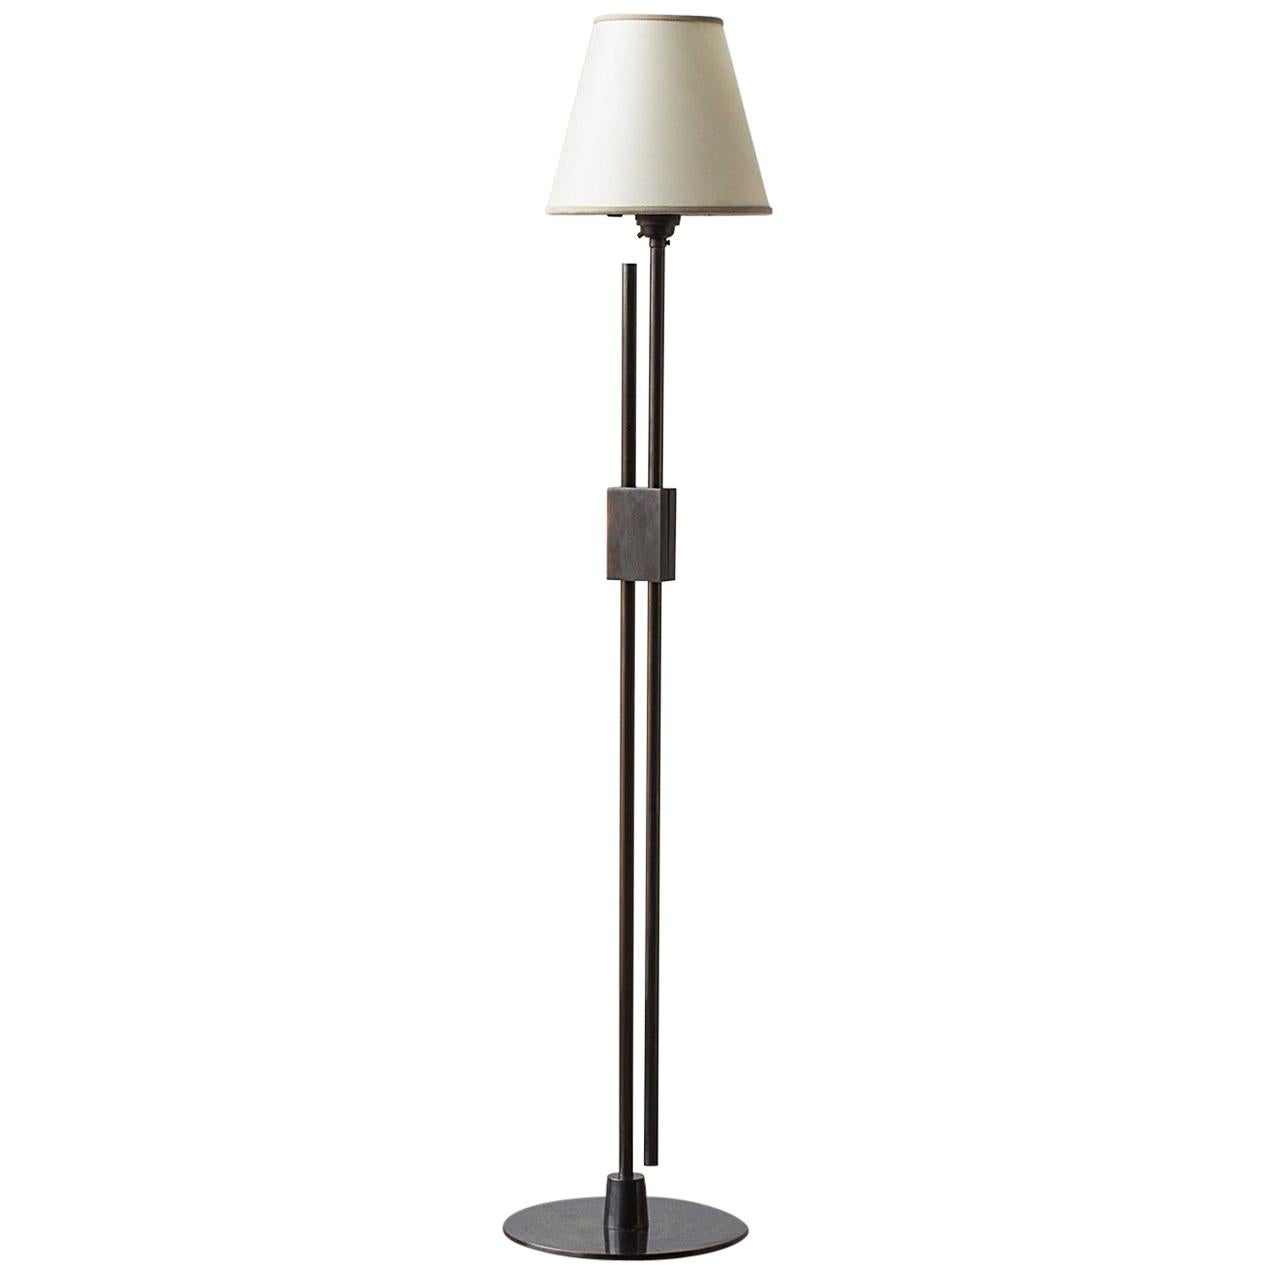 Series04 Floor Lamp Patinated Brass Adjustable Height, Goatskin Shade Suede Trim For Sale